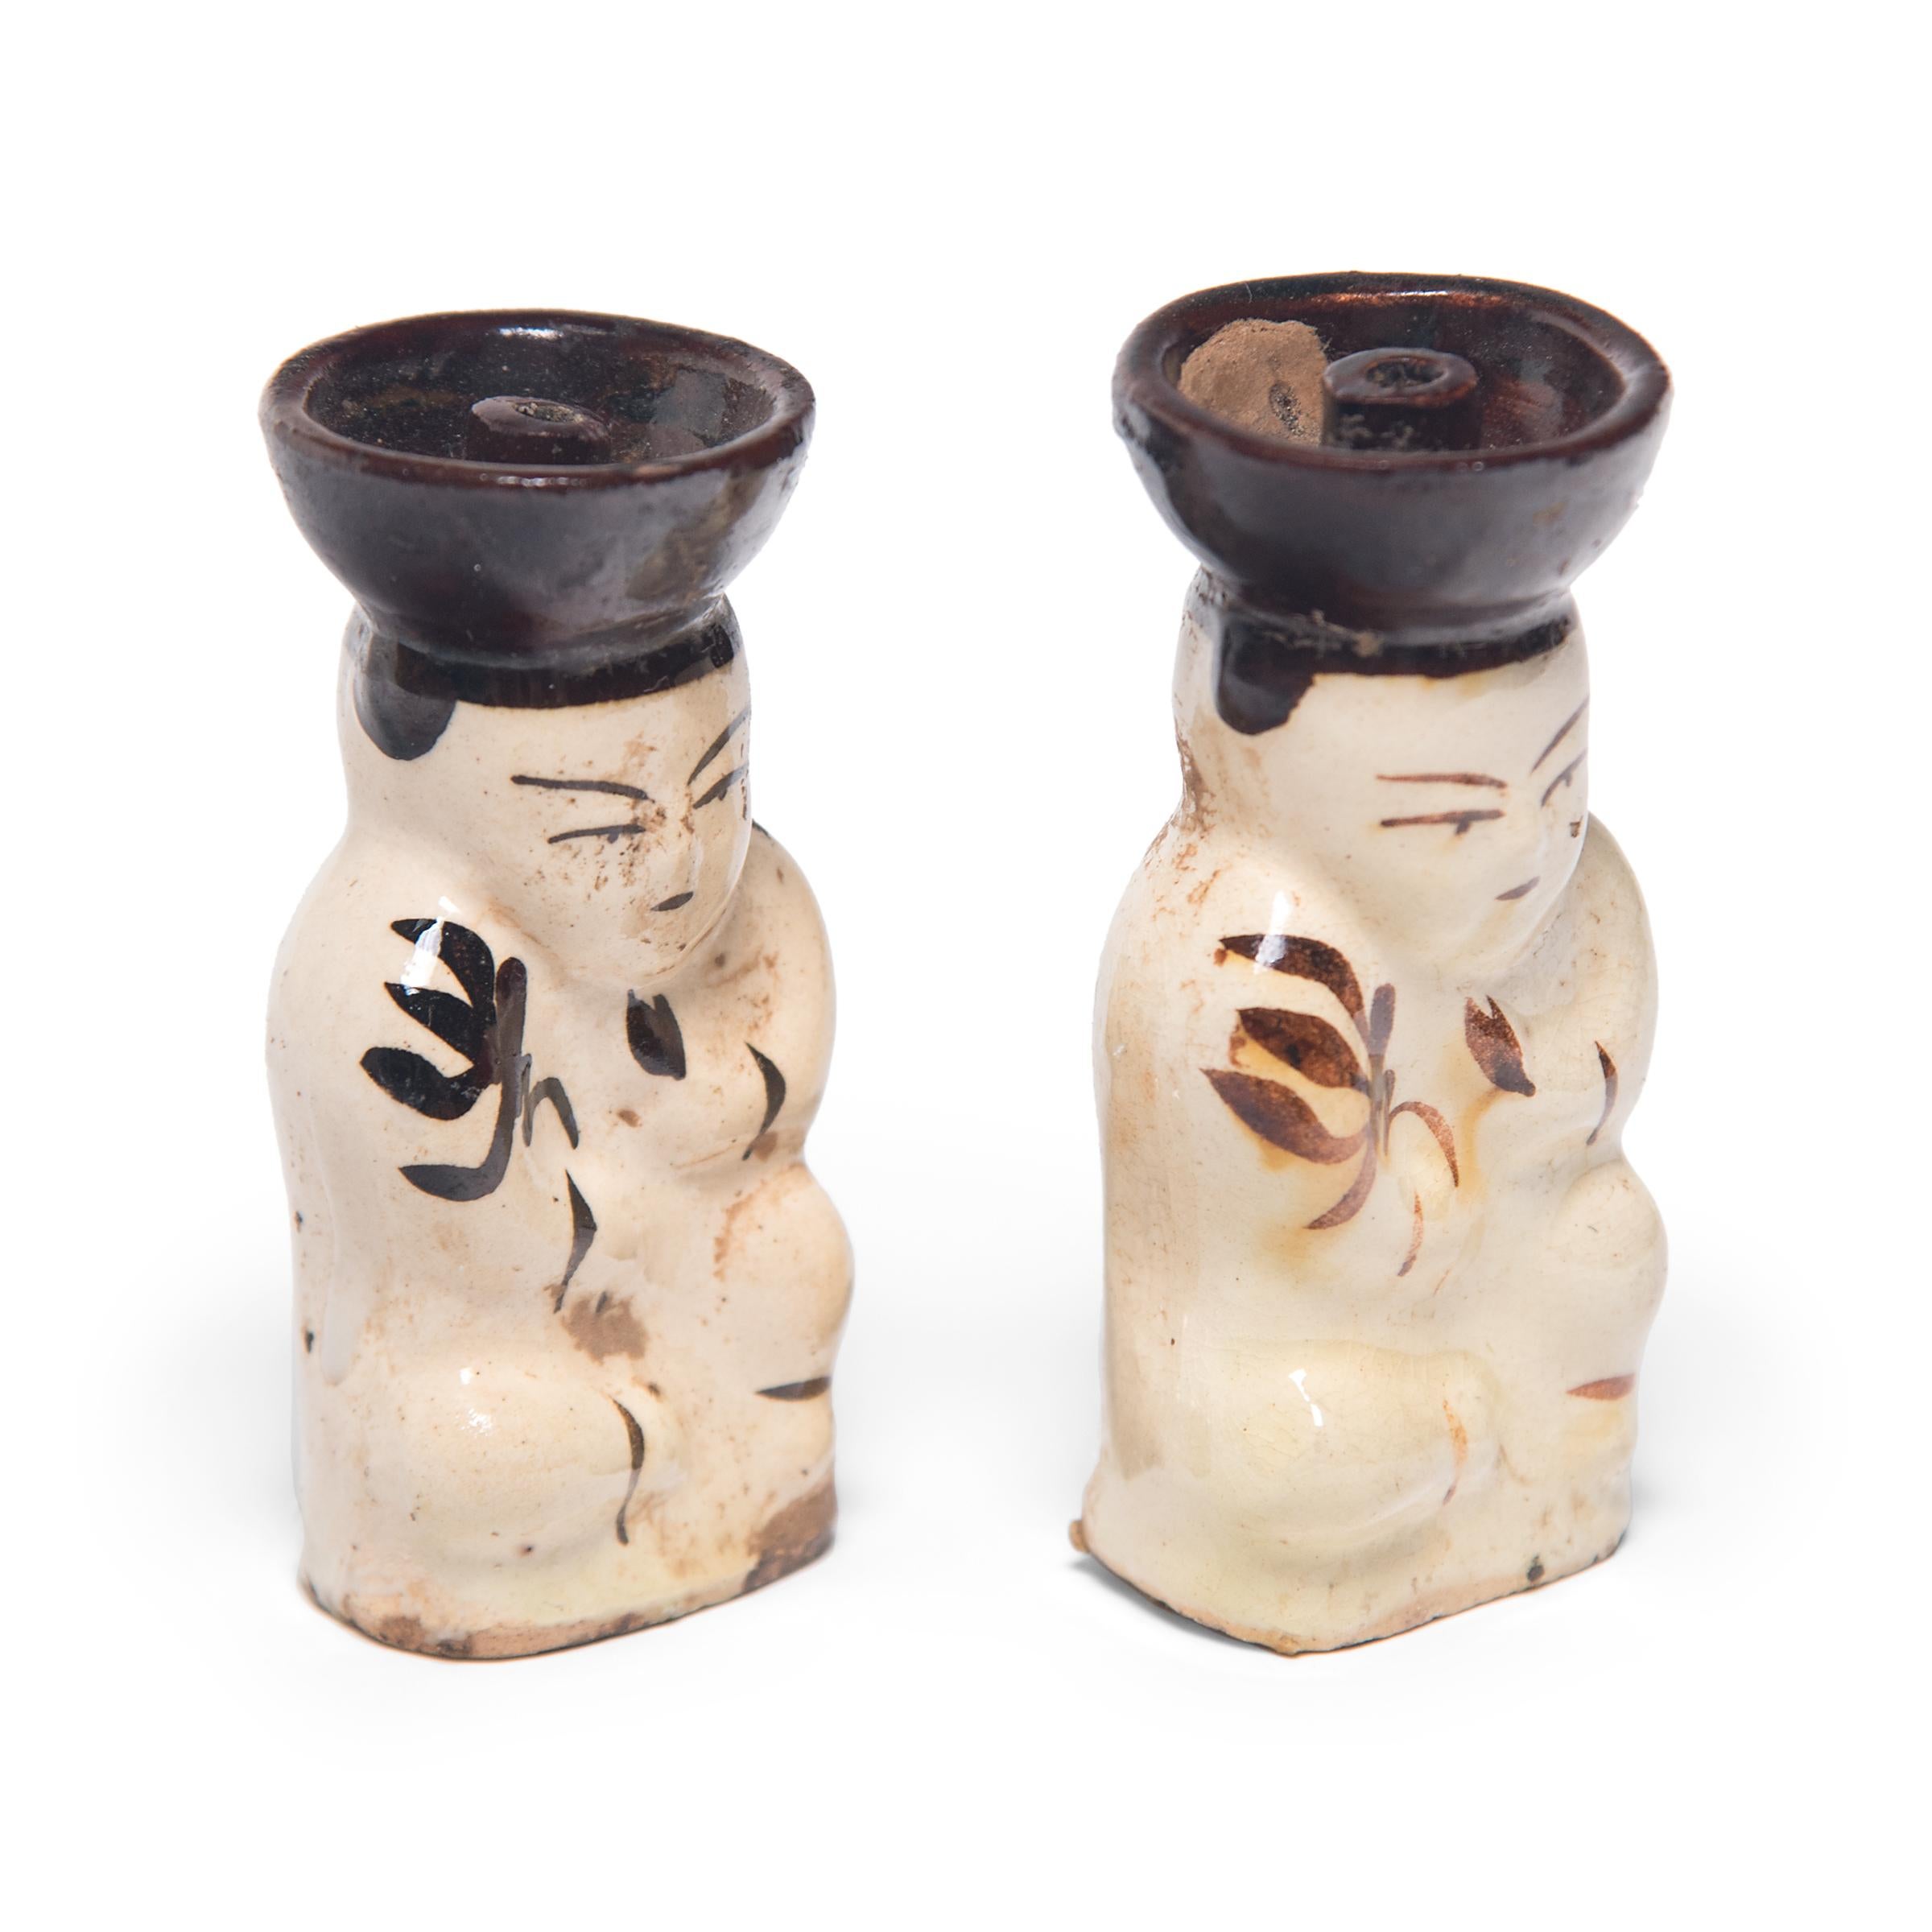 These early 20th century ceramic oil lamps are formed in the shape of a young boy, a motif often referred to as a 